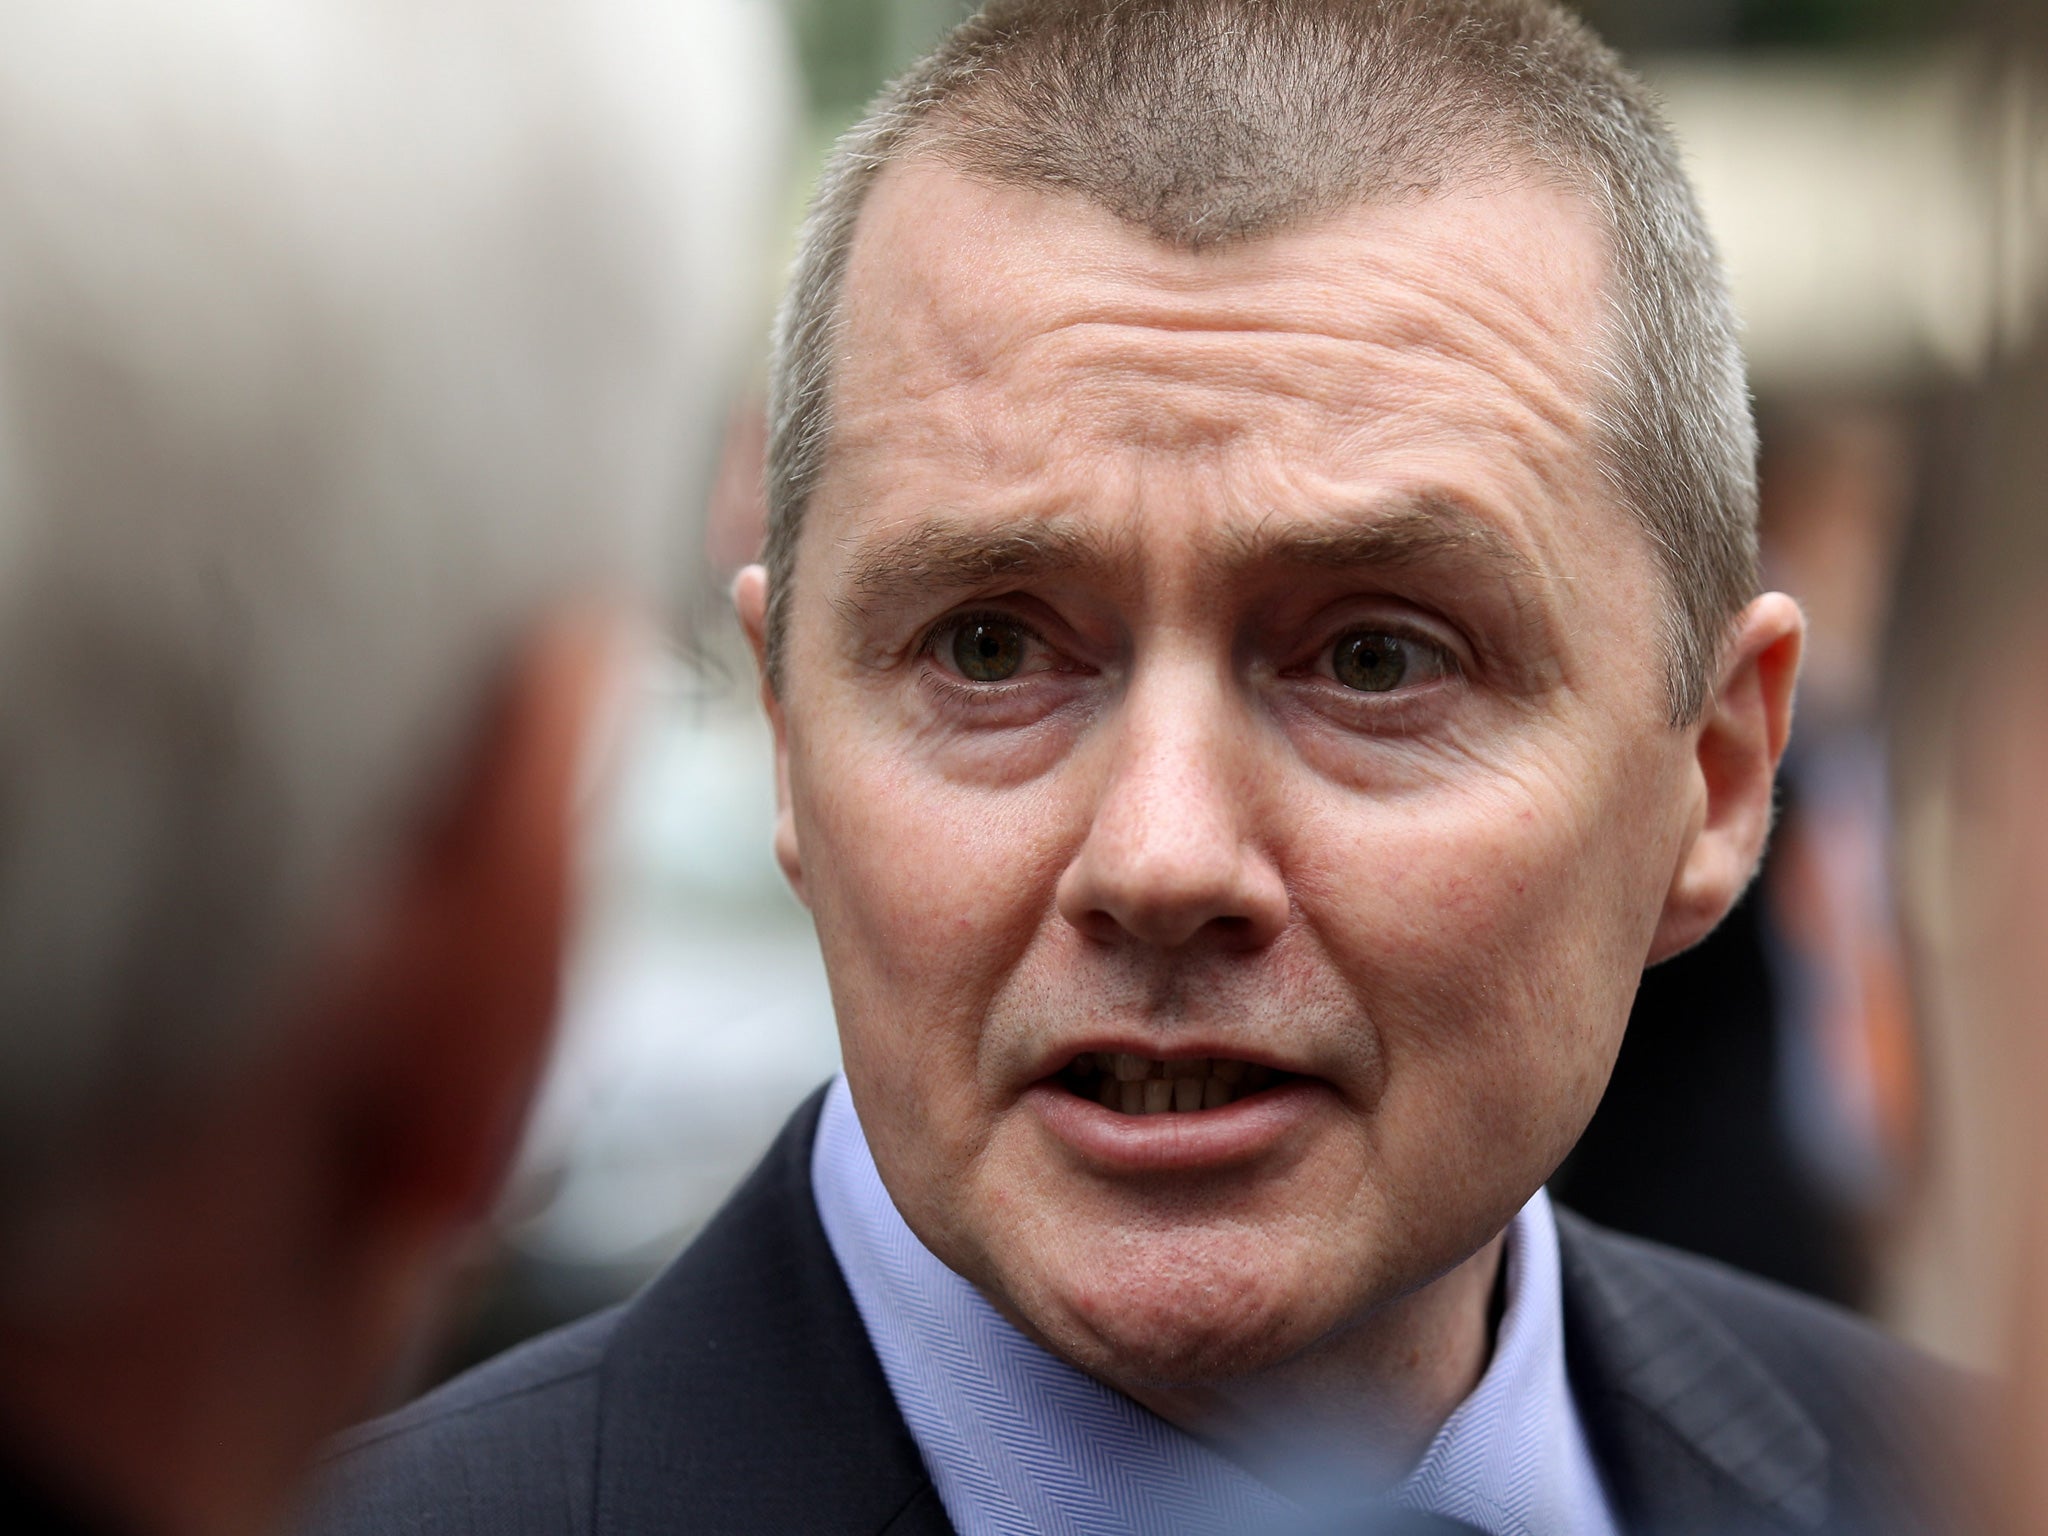 Willie Walsh, Chief executive of British Airways, says: "We must create the right environment to stimulate and support Britain’s economic regeneration."